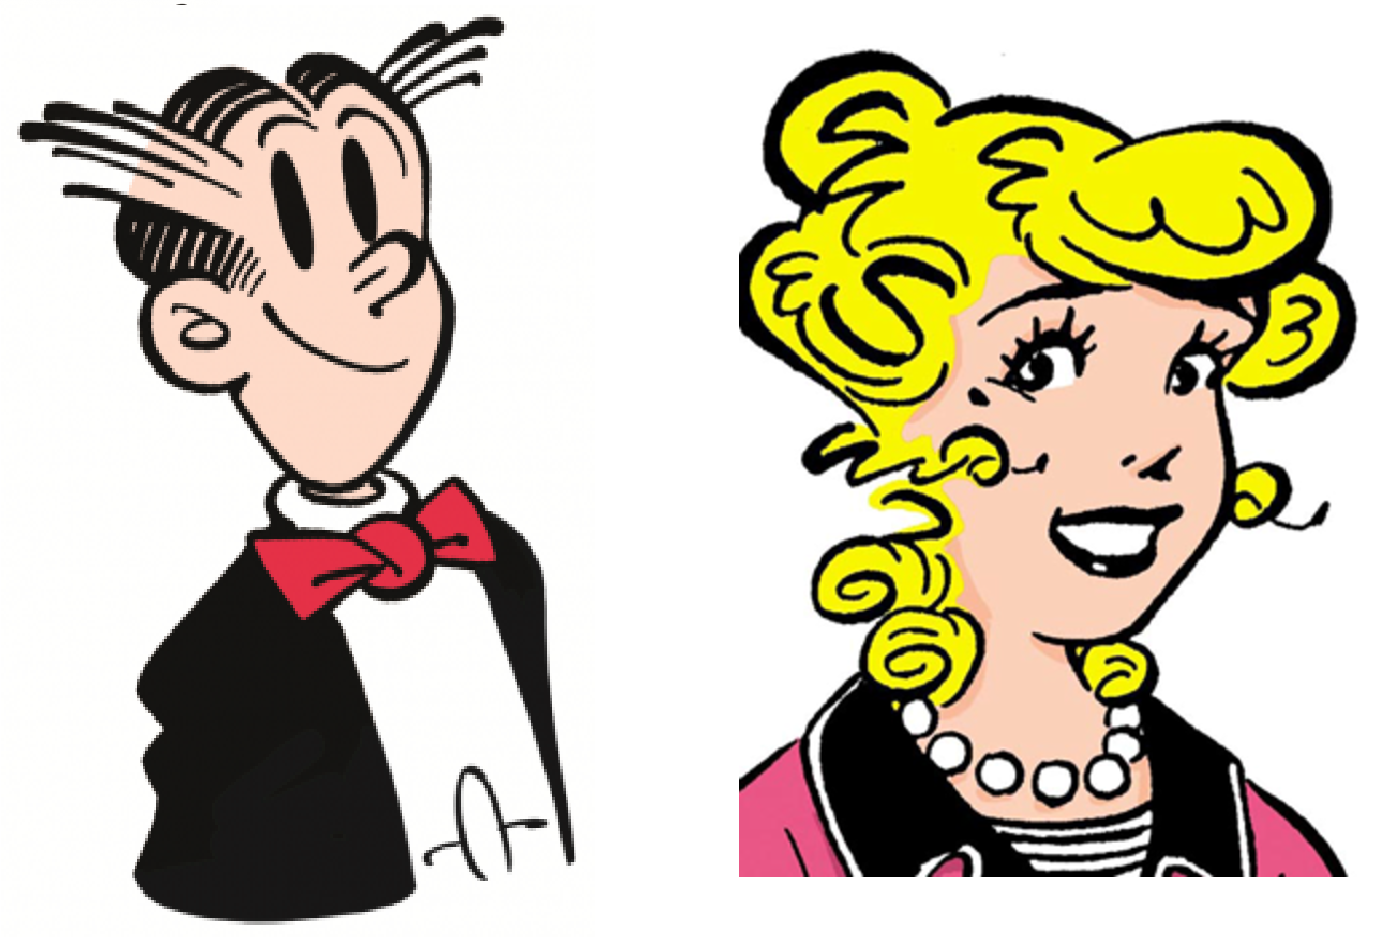 3. "Blondie and Dagwood" animated film - wide 2